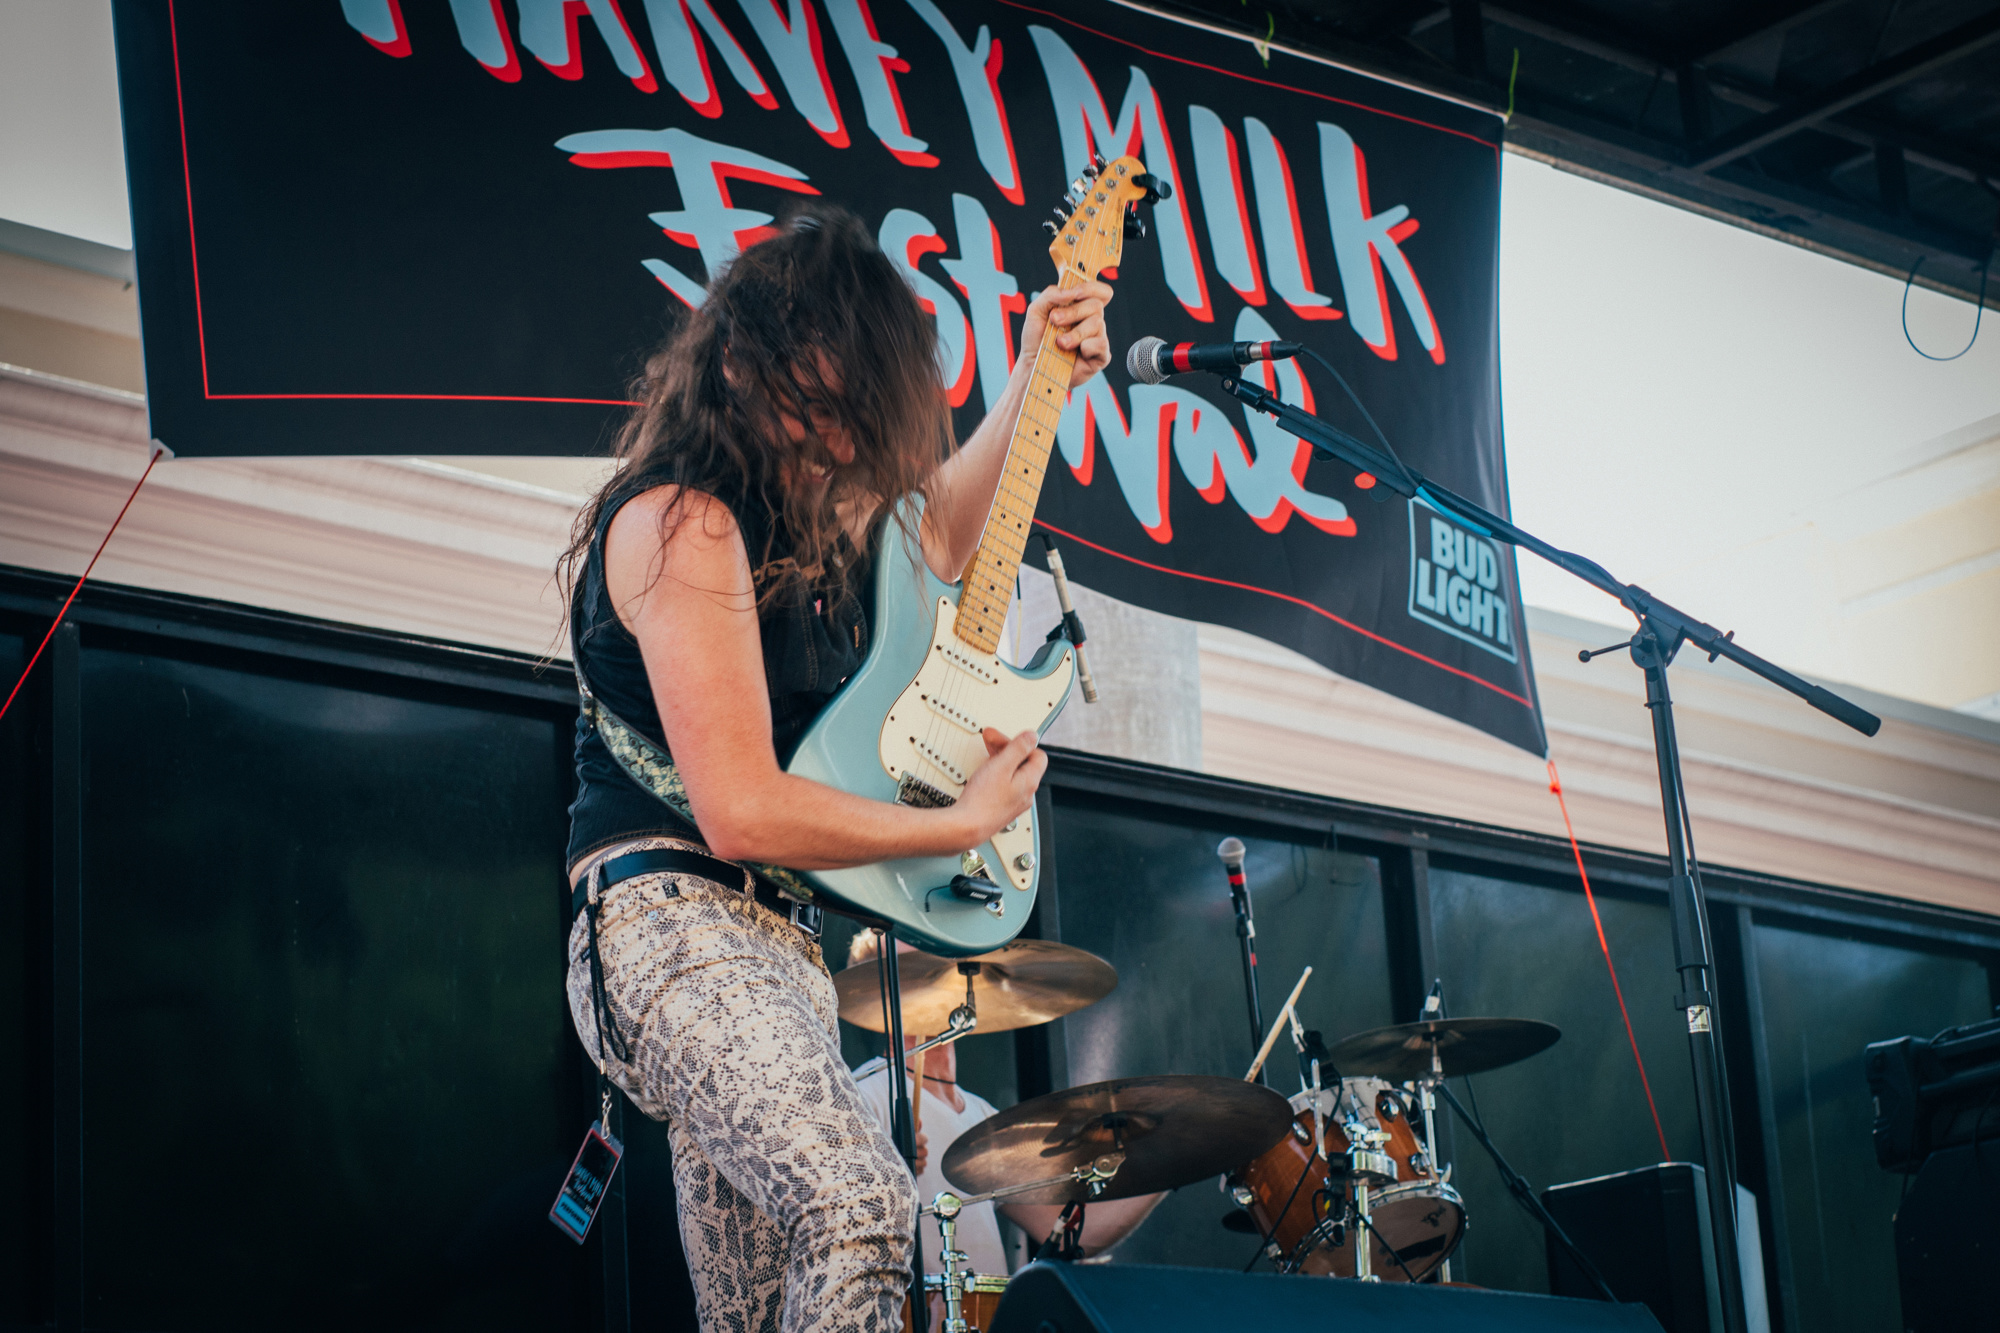  Josh Scheible plays with Physical Plant at Harvey Milk Festival. Photo by Shane Donglasan.